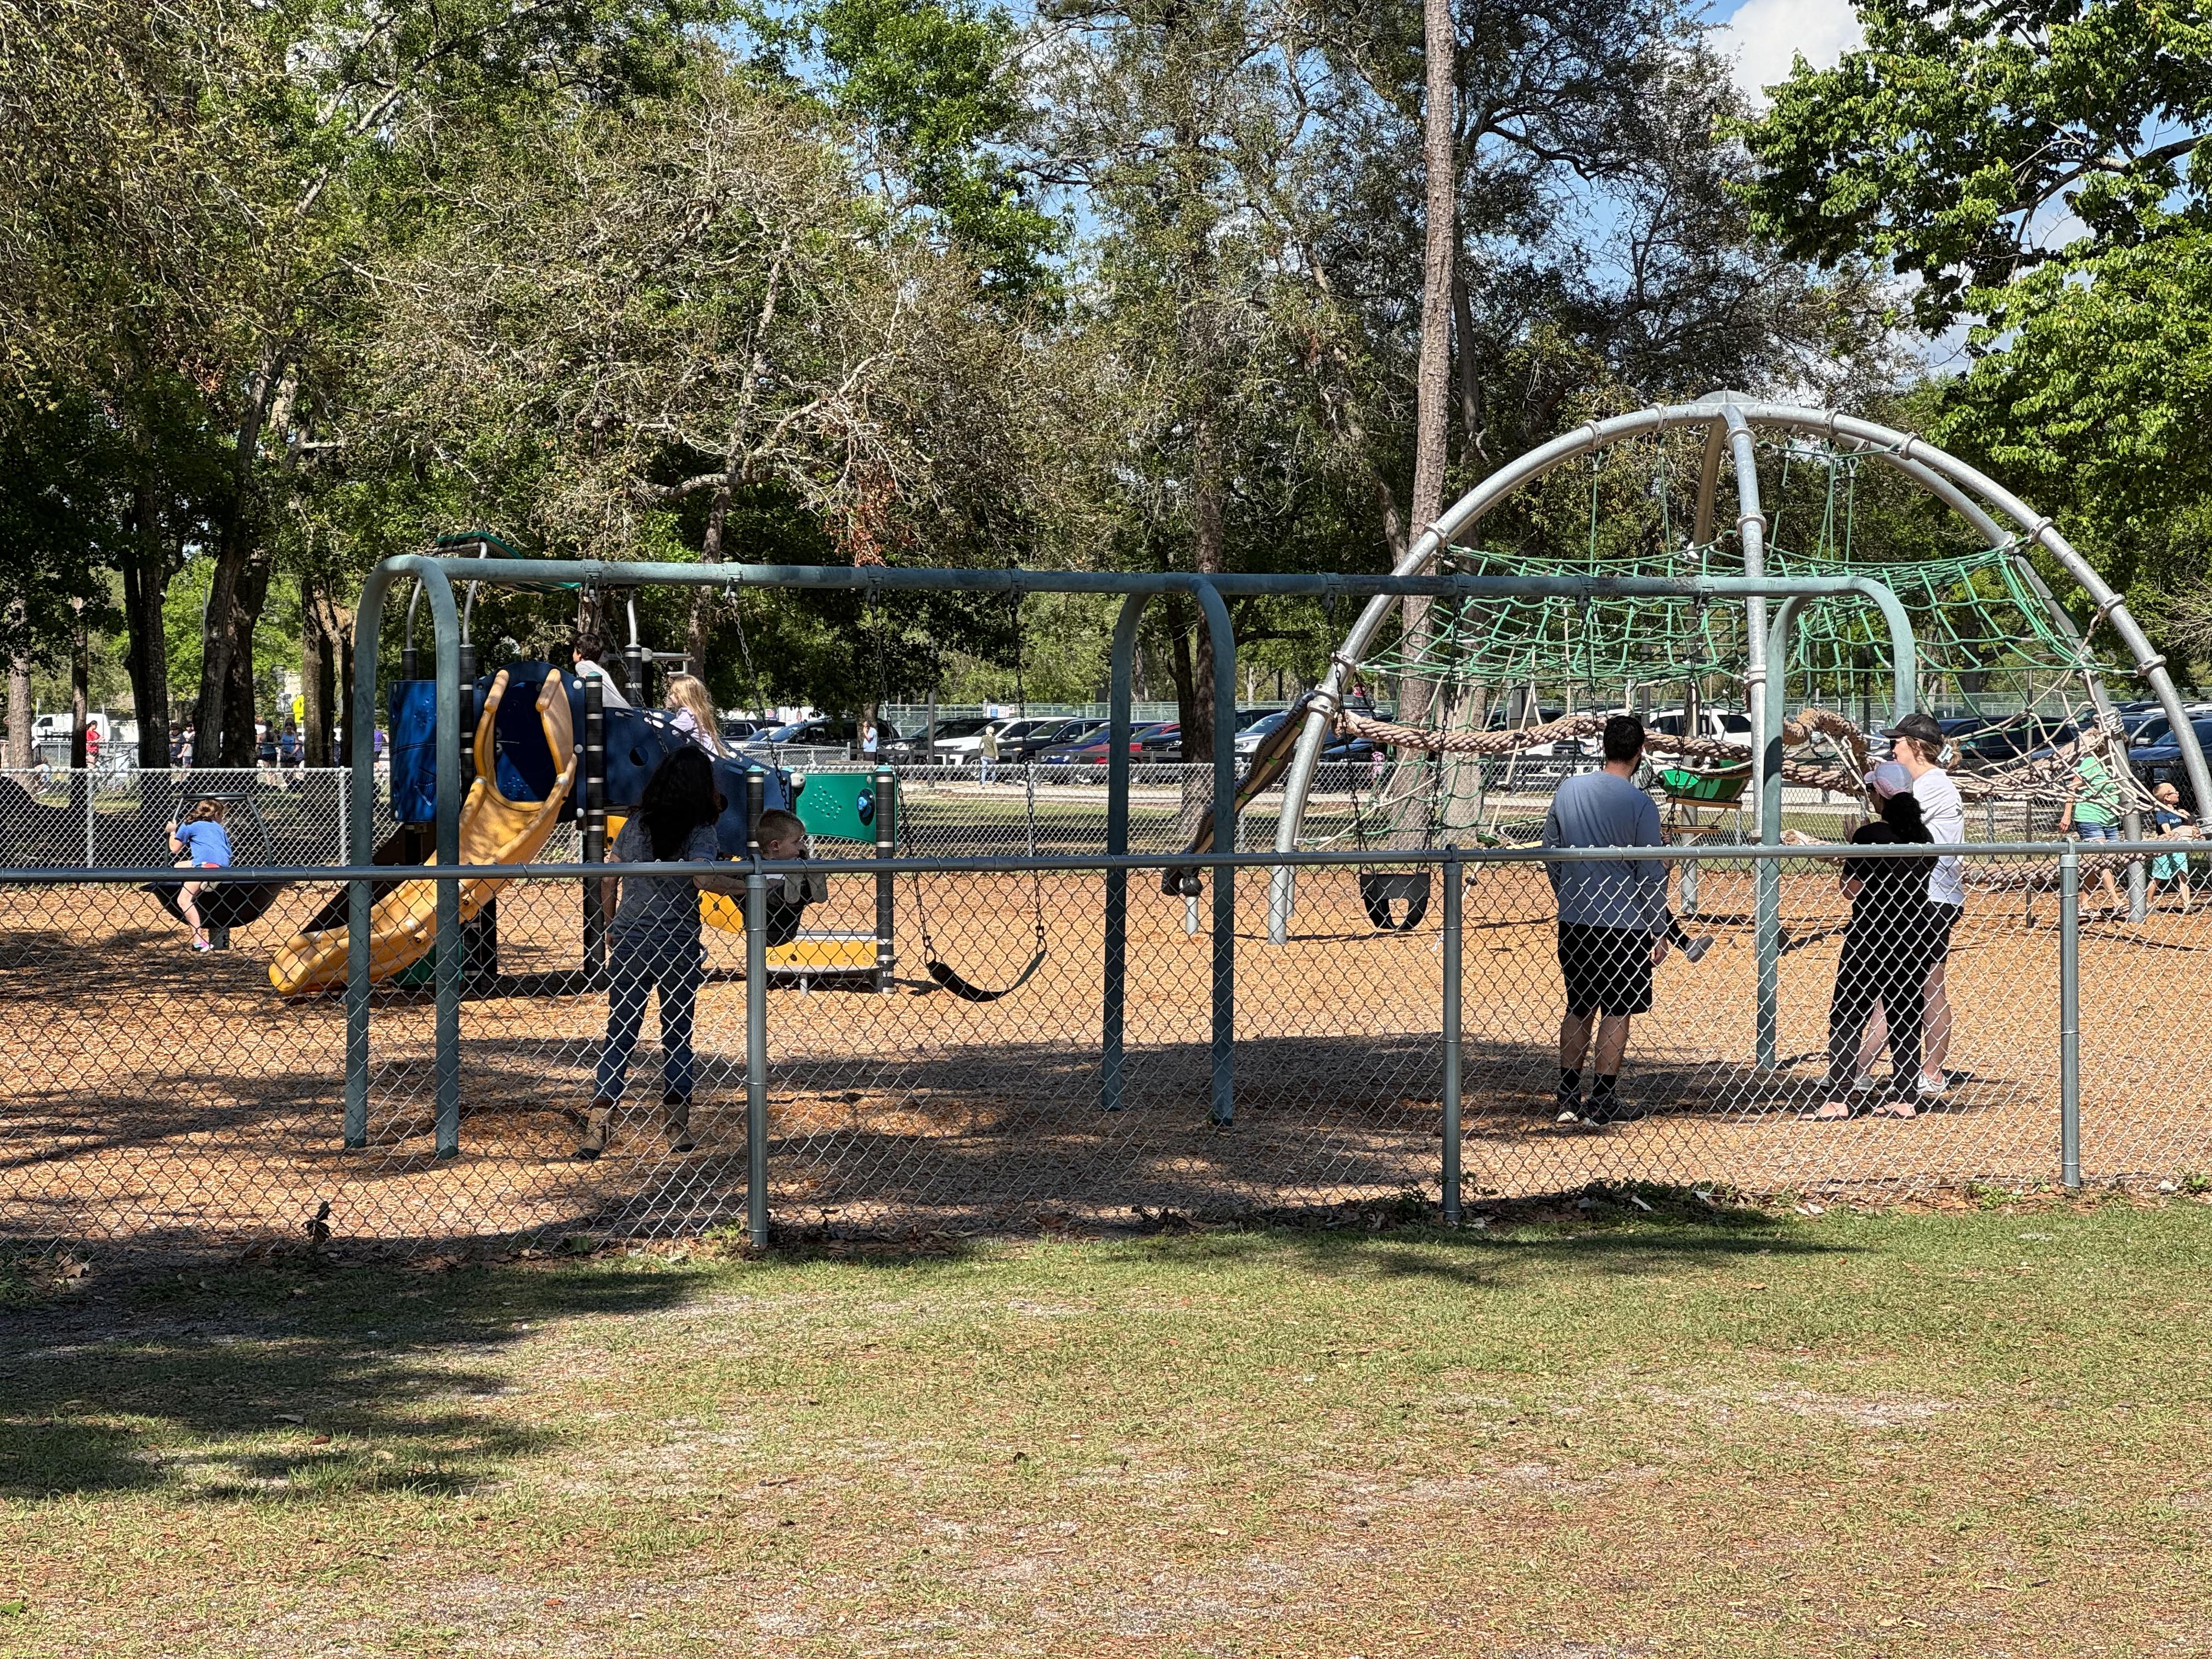 Parents and children playing at a playground.